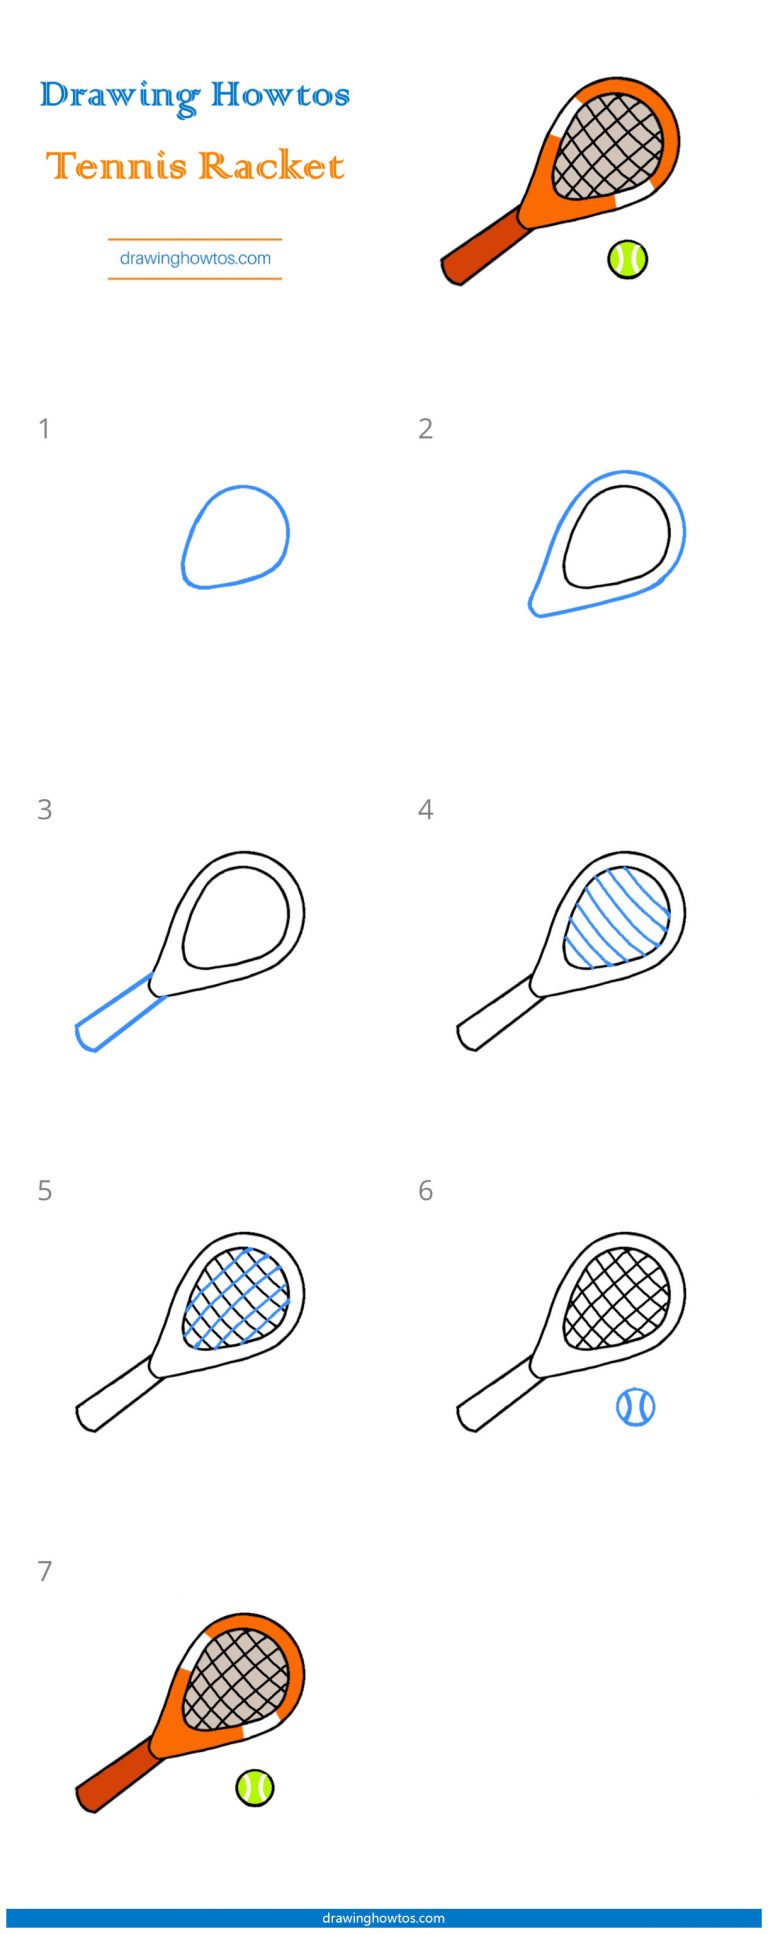 How to Draw a Tennis Racket Step by Step Easy Drawing Guides